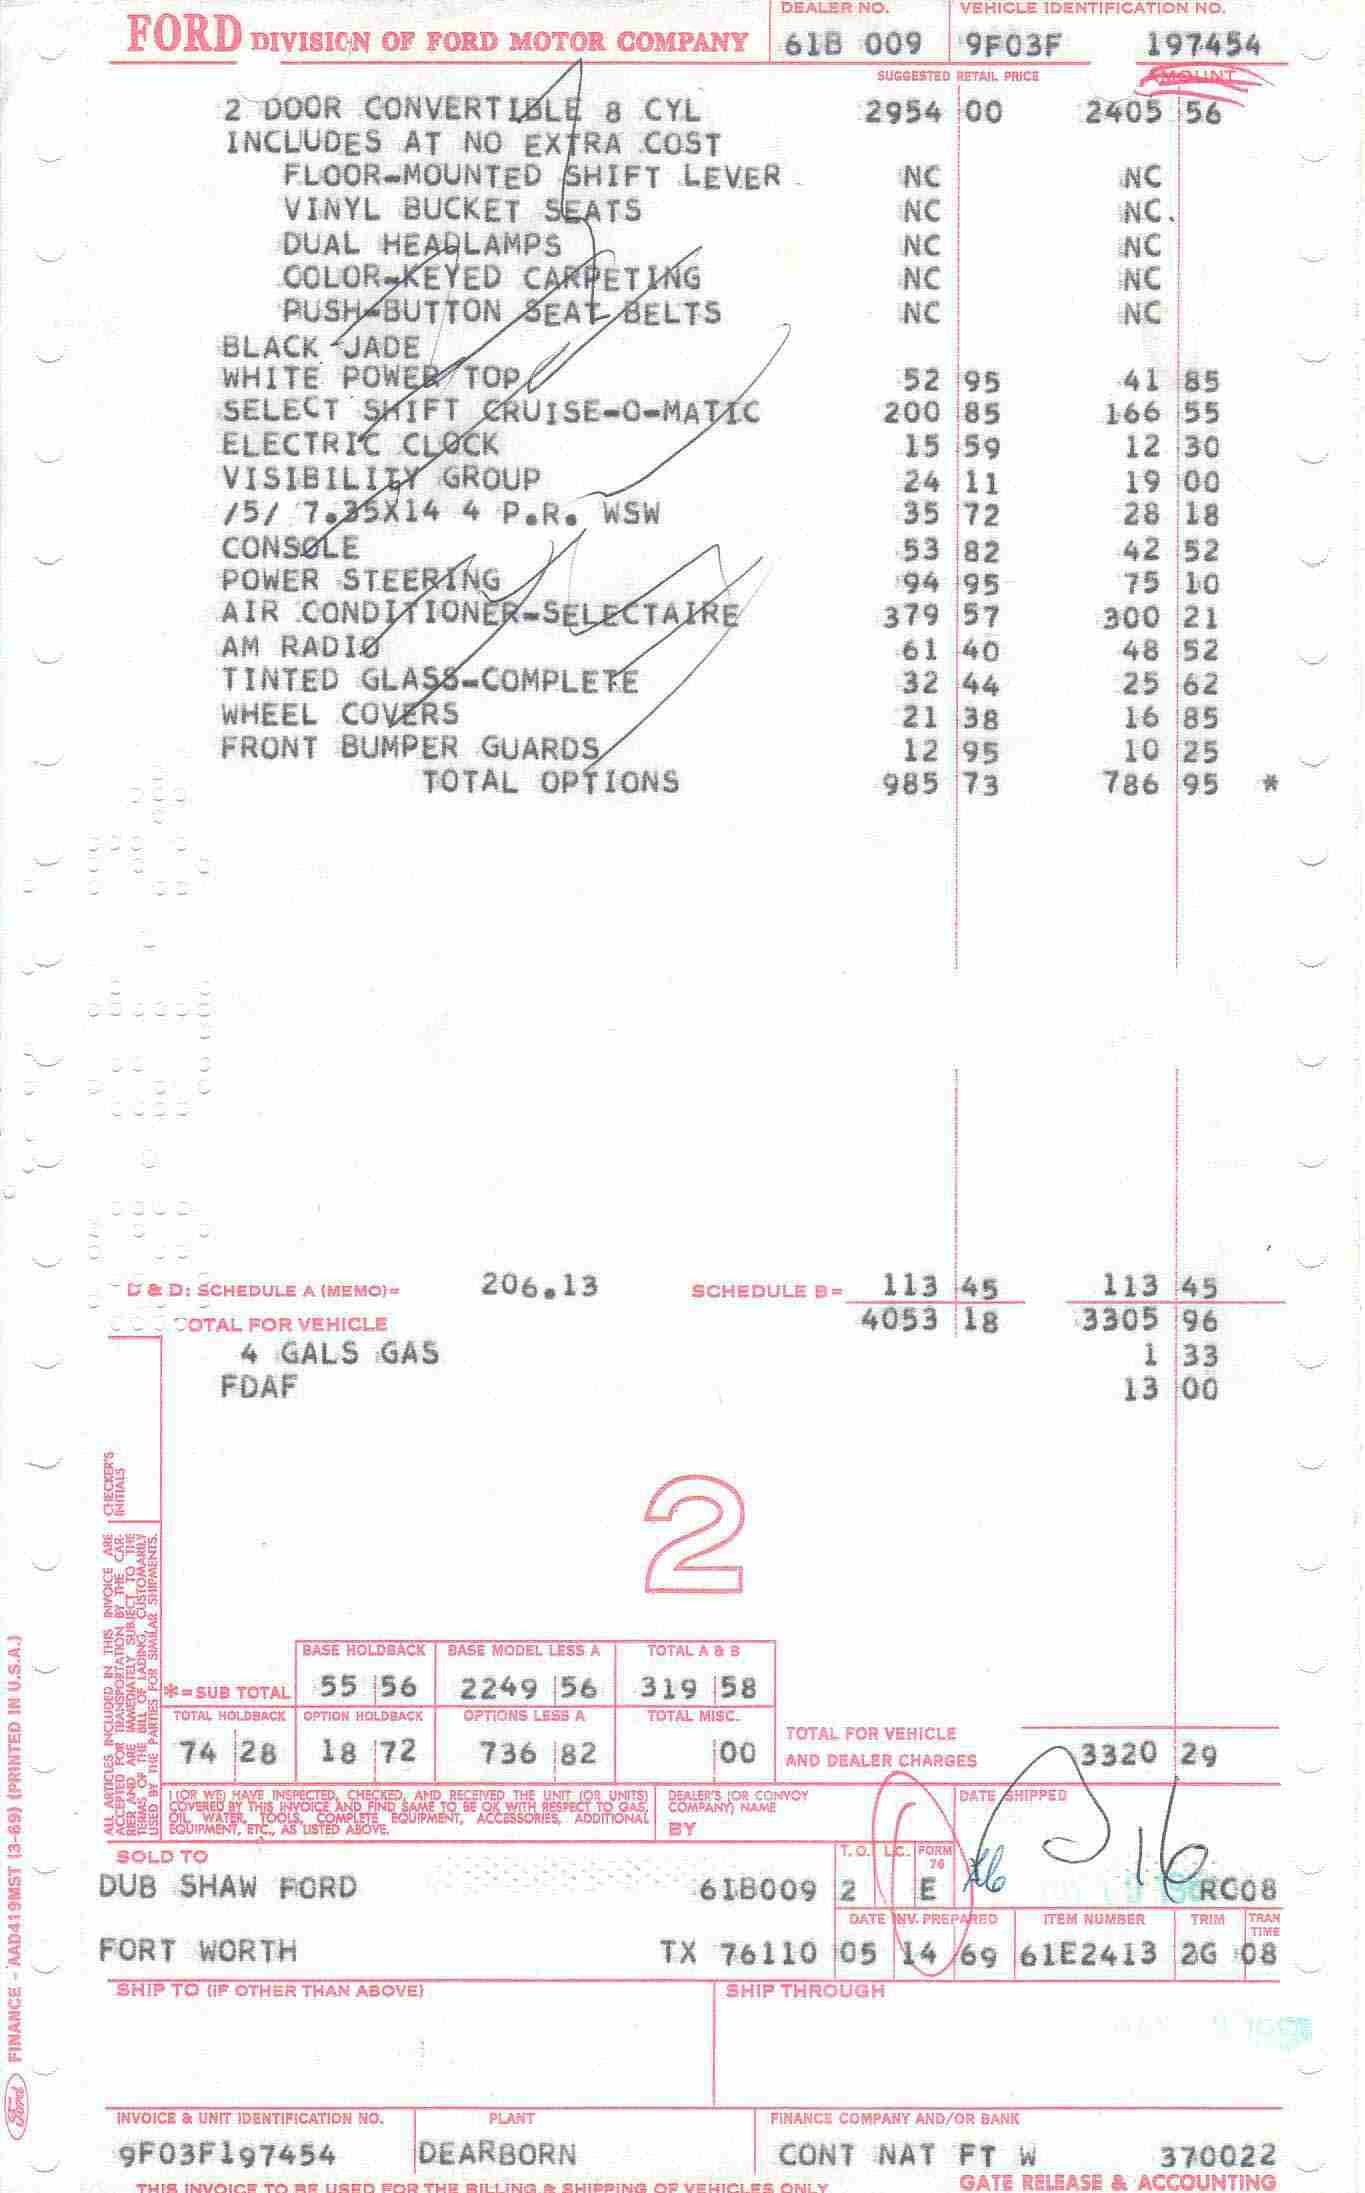 marti auto works concourse quality hobist price invoice pricing for new cars